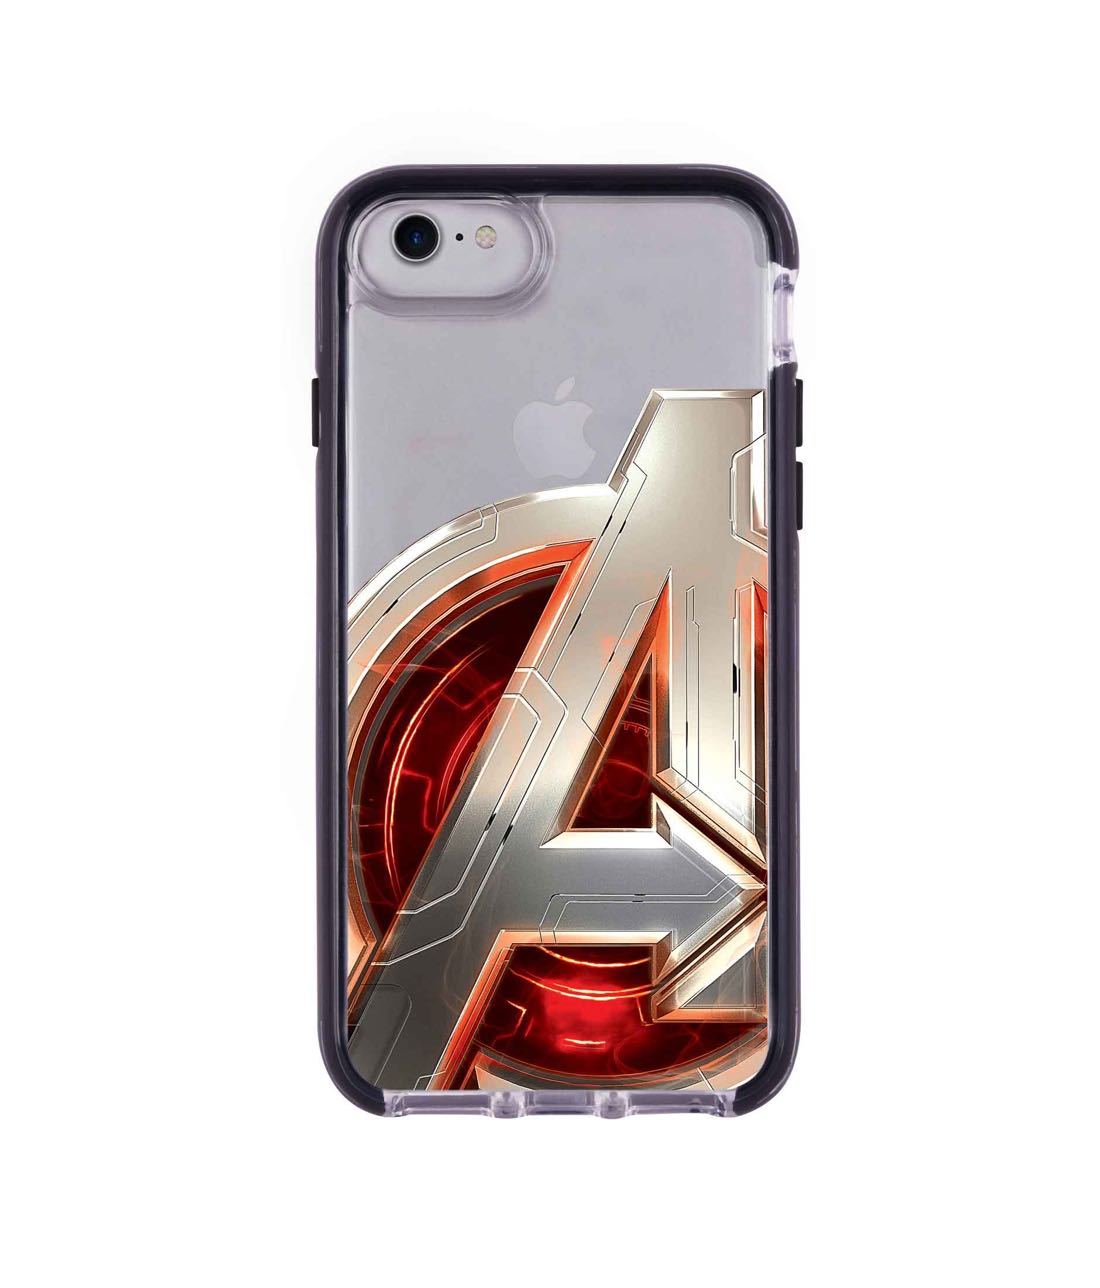 Avengers Version 2 - Extreme Phone Case for iPhone 7